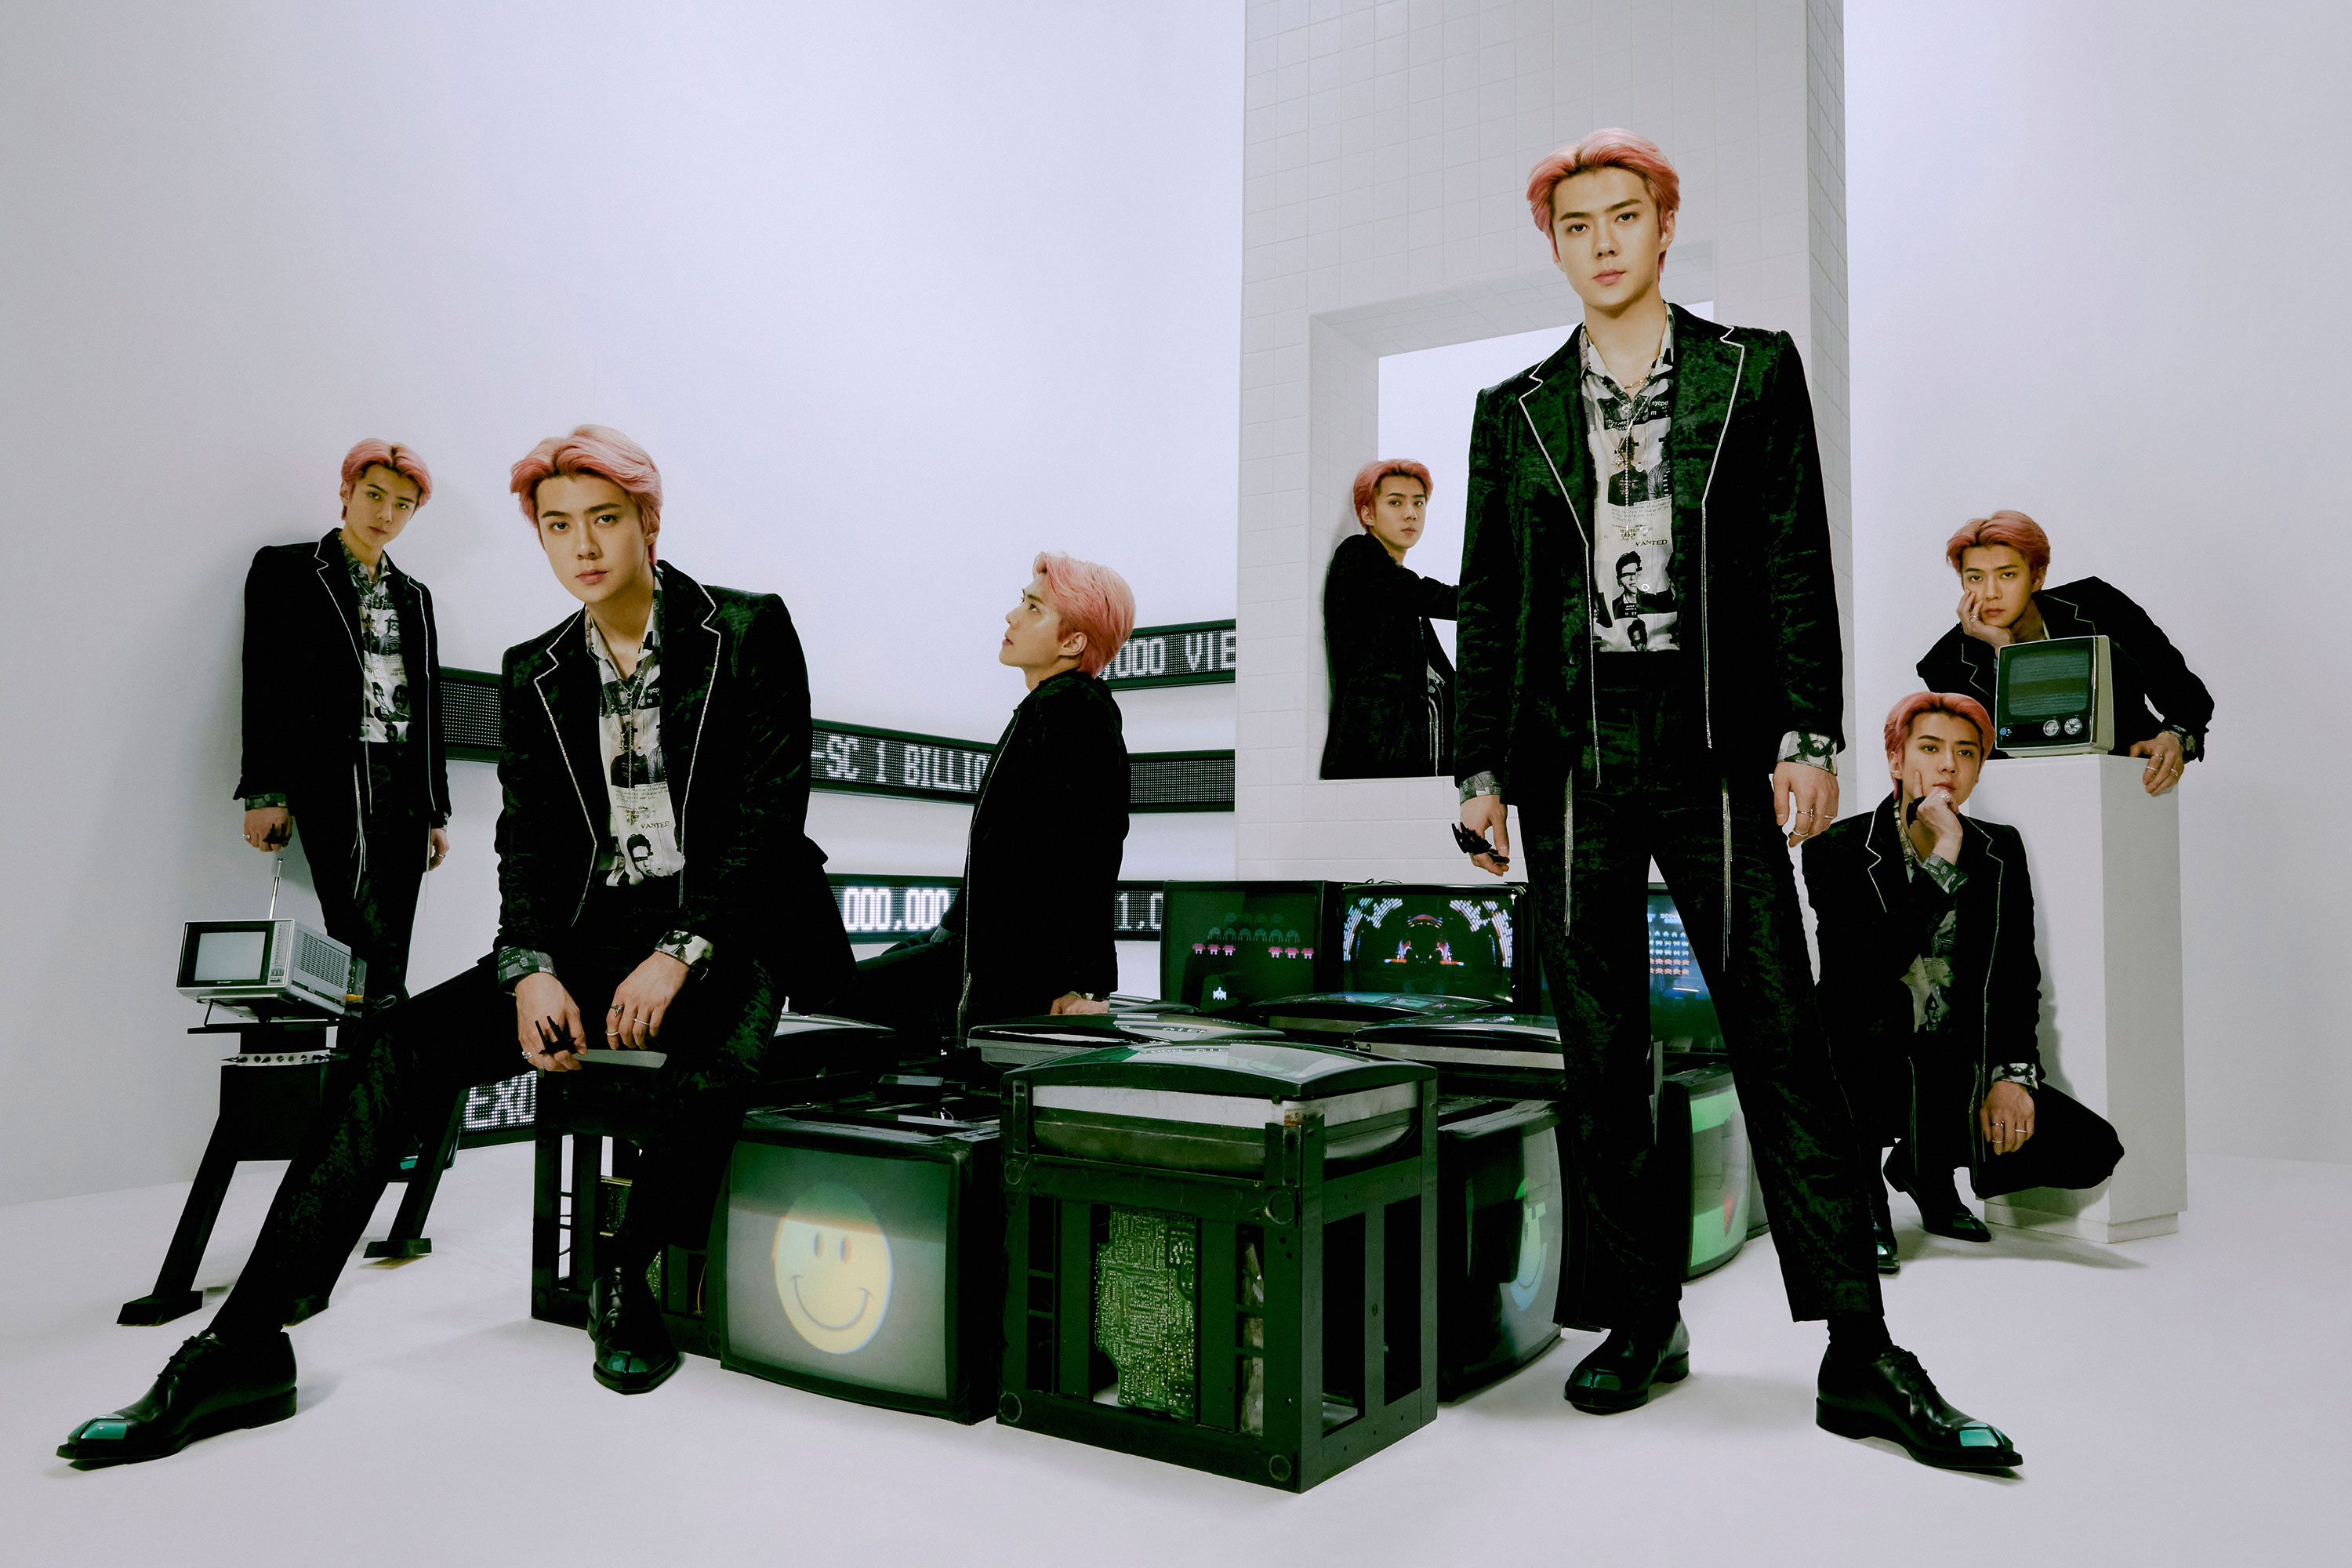 EXO Sehun & Chanyeol shows the unique music color with the first Regular album 1 billion views.Sehun & Chanyeols first Regular album 1 billion views, which will be released on the 13th, will feature a total of 9 tracks in a variety of moods, including the title song 1 billion views of trendy hip-hop genre.In particular, Sehun & Chanyeol will participate in the song writing of all songs following the first mini album What a Life (What a Life) released in July last year, as well as three songs including his own songs Chuck, Wings, On Me (On Me)In addition, this album was followed by the last album, and the dynamic duos gako was in charge of producing the whole song, and once again fantastic breath with Sehun & Chanyeol. Hip-hop label AOMG representative producer GRAY (Gray), hip-hop group rhythm power boy and hanger also participated in the song work to improve the perfection of the album.In addition, the teaser image of Sehun, which transformed into a new concept, was released on the official website of Sehun & Chanyeol today (3rd) at 0:00 and various SNS EXO accounts, capturing the attention with Sehuns unique chic eyes and charisma.iMBC Cha Hye-mi  Photos